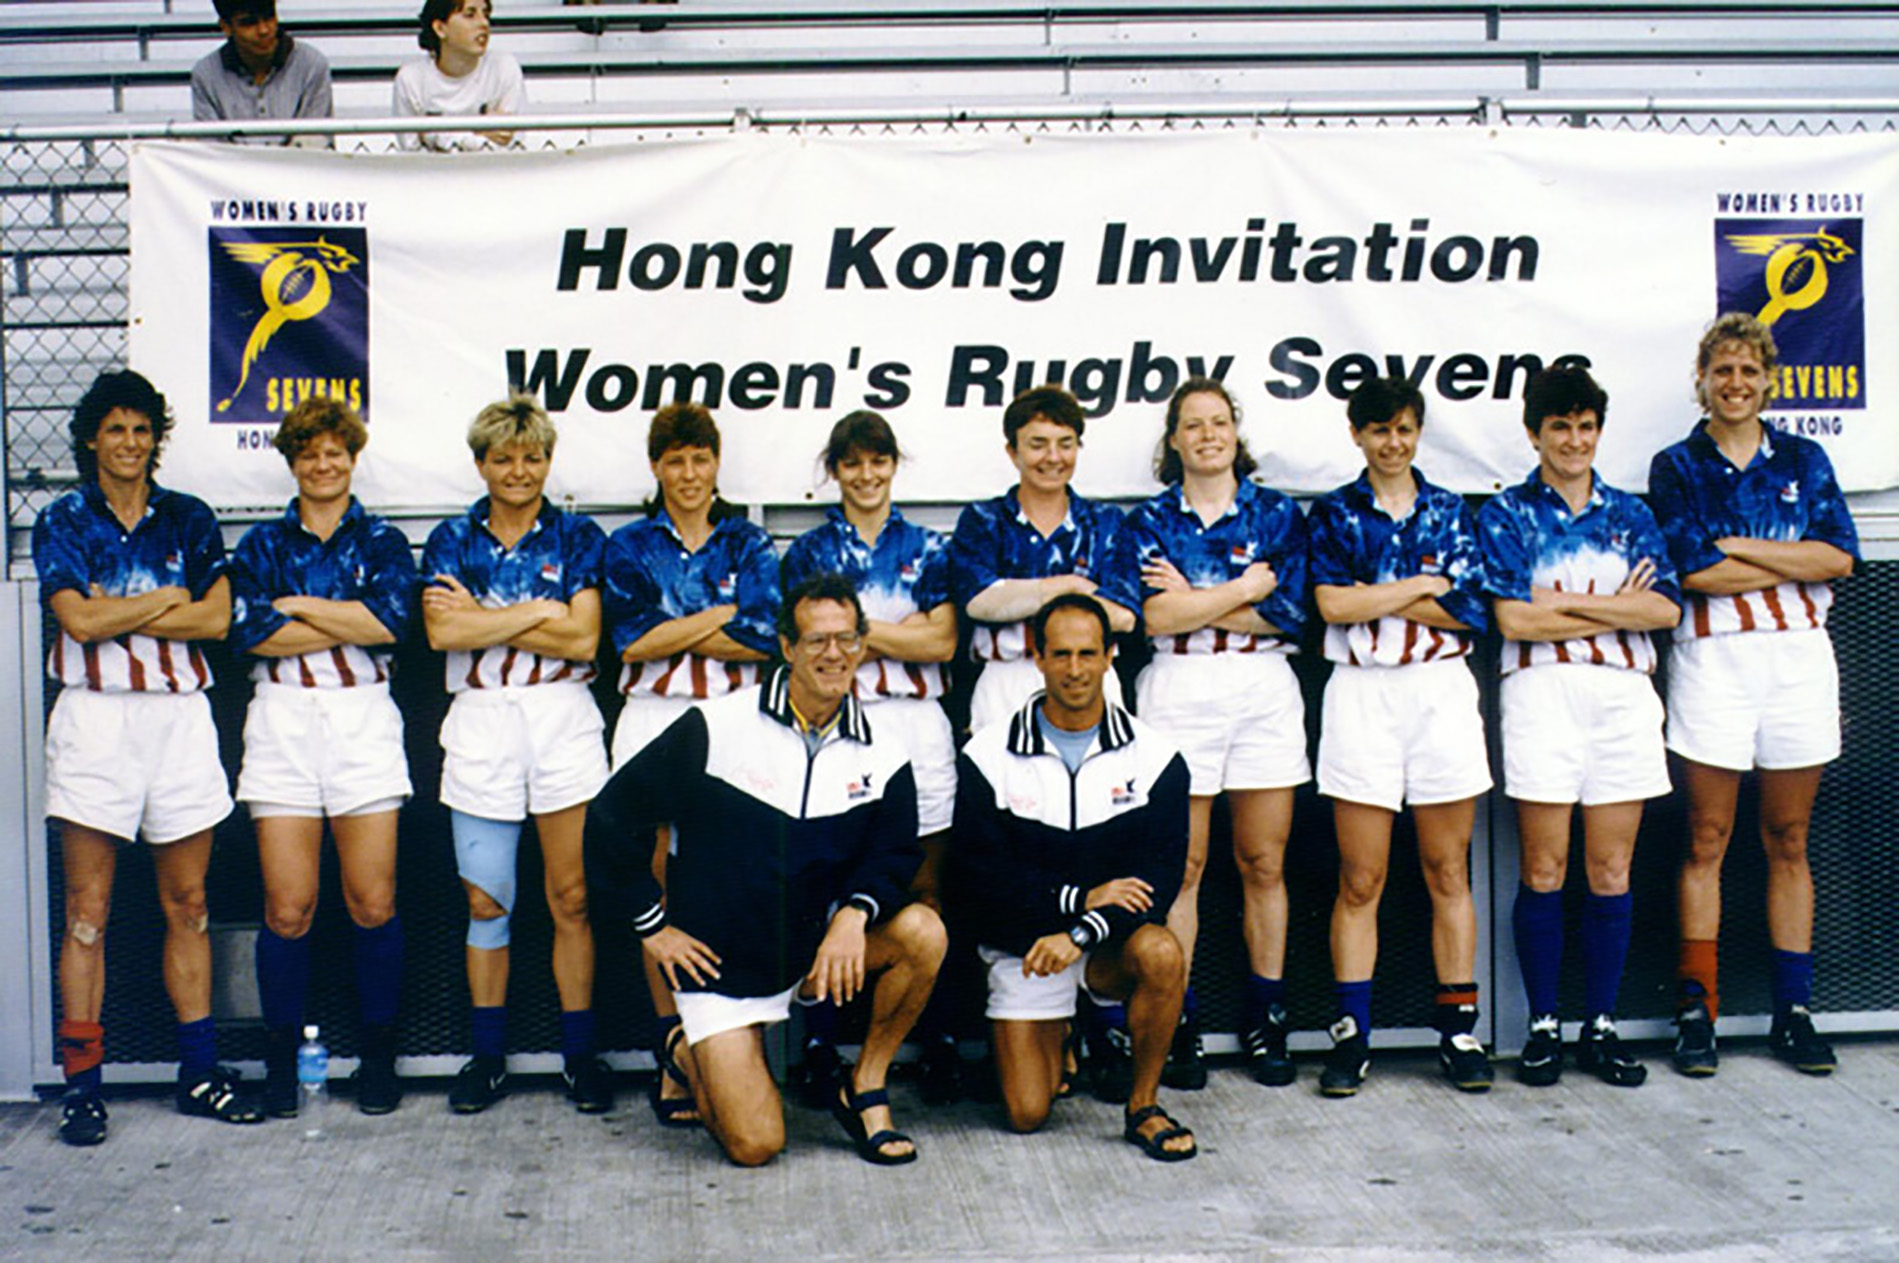 1997 USA Rugby Women's 7s Team